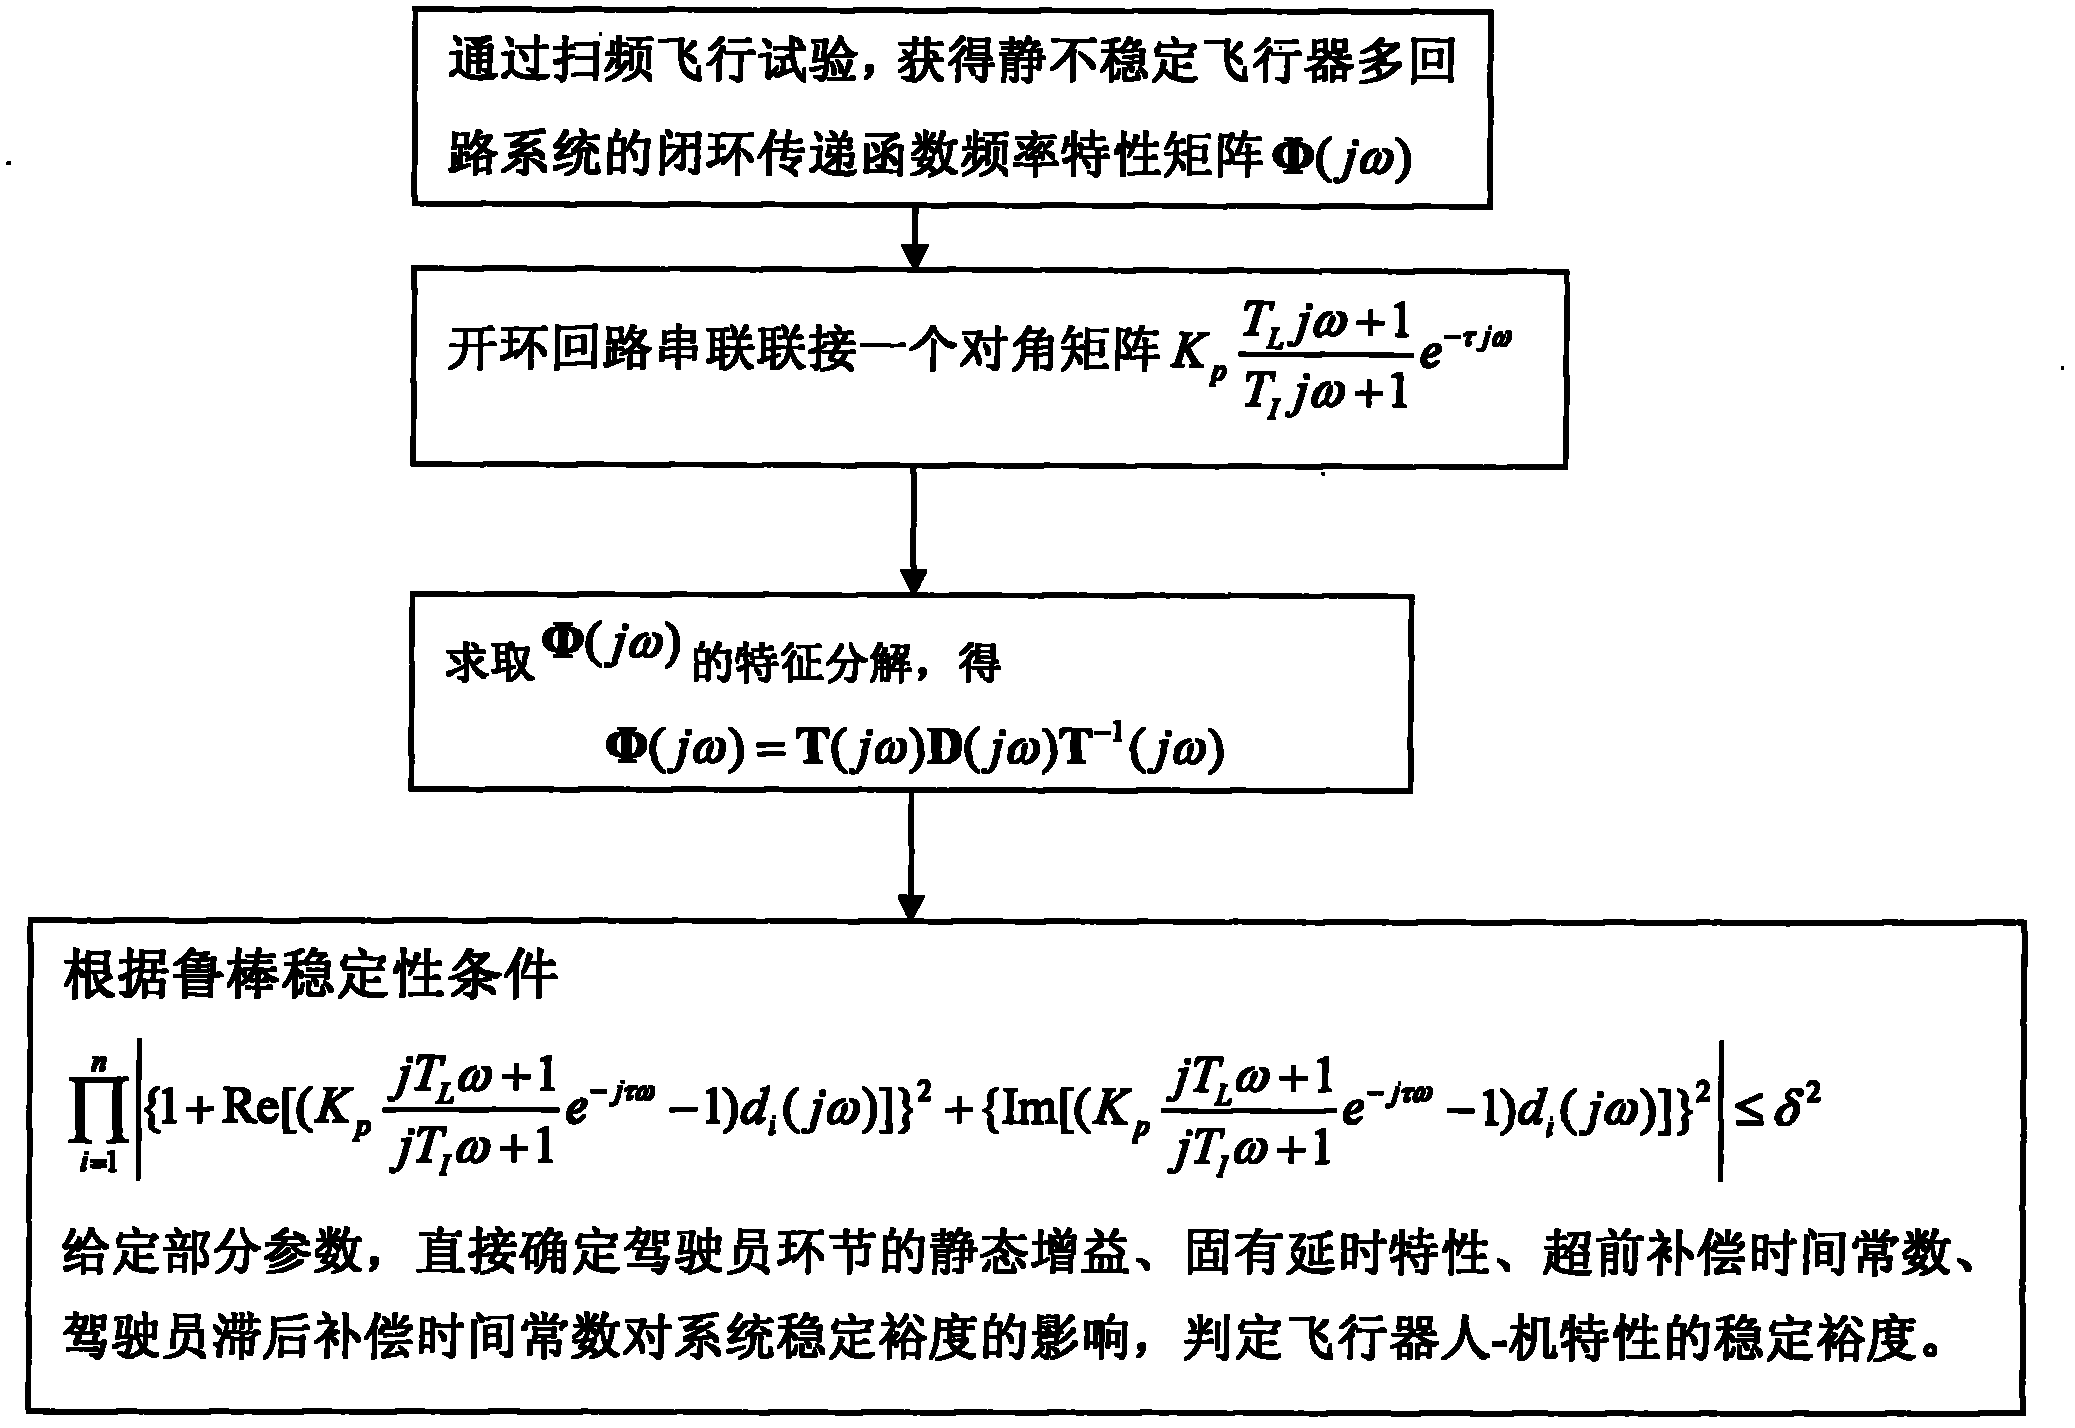 Flight test robust determination method for equivalent man-machine closed loop characteristic of statically unstable aircraft